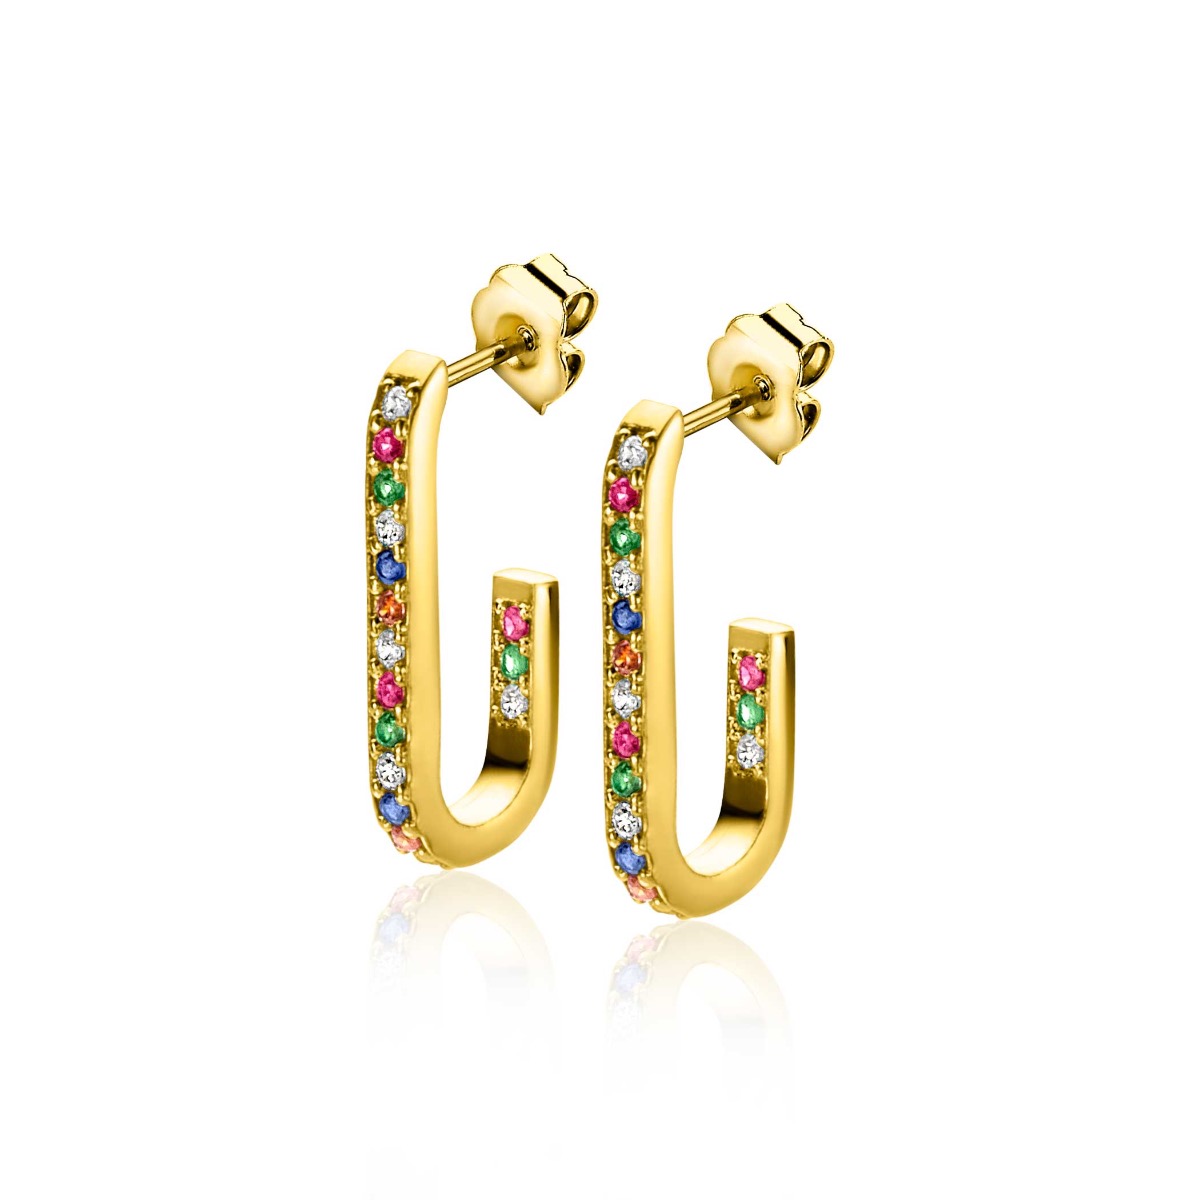 20mm ZINZI Gold Plated Sterling Silver Earrings with Oval Shape Set with Rainbow Zirconias ZIO2310YMC